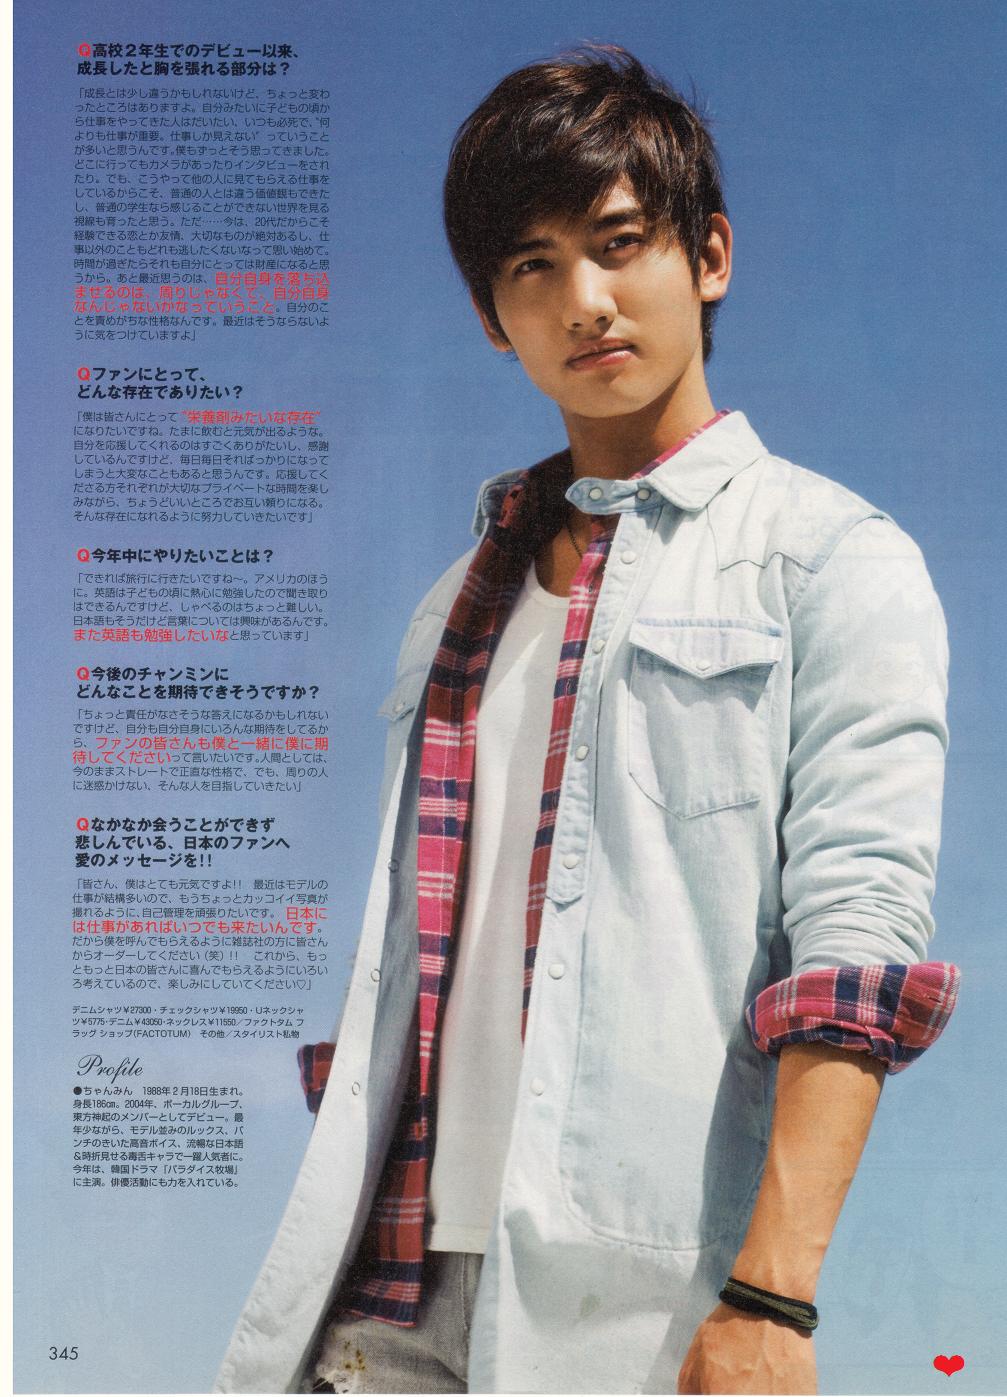 Changmin is clearly suffering from Benjamin Button syndrome. – Seoulbeats